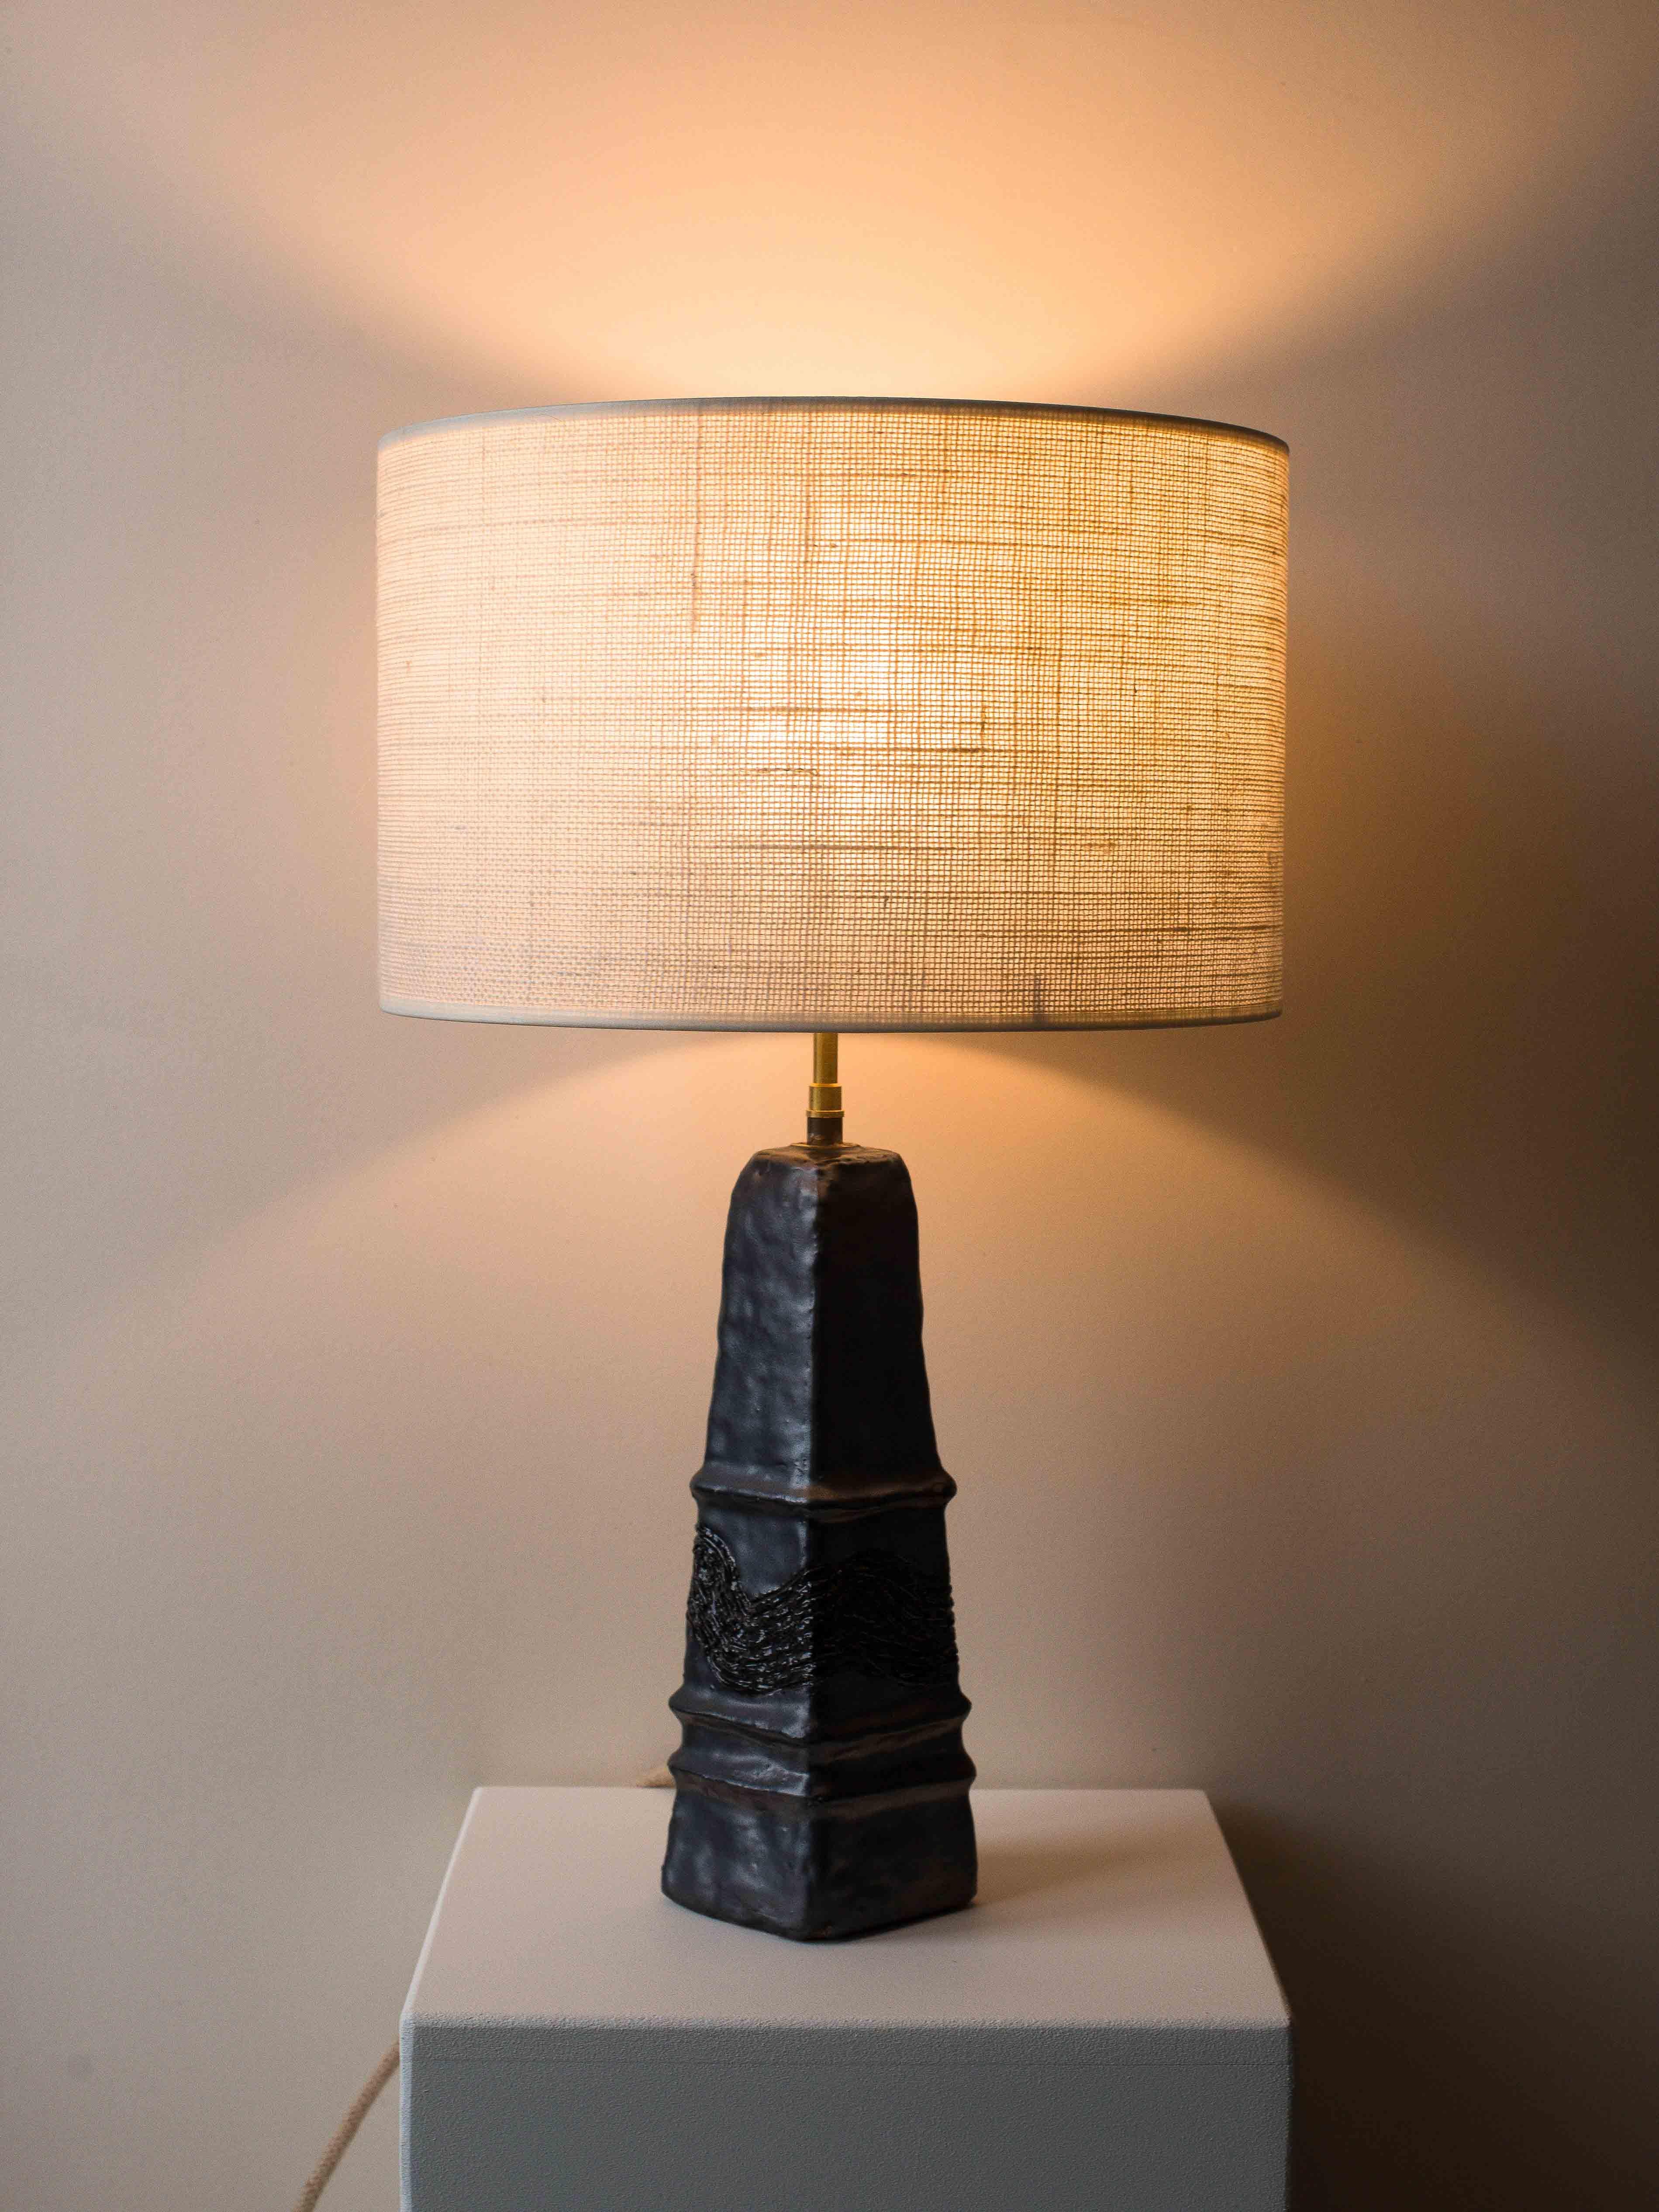 Mid-Century black clay table lamp, circa 1970.

This clay lamp is a unique piece, dating back to the 1970s and handmade by a French artisan. Its pyramidal design and graphic patterns give it a sculptural and elegant aesthetic. The clay surface is